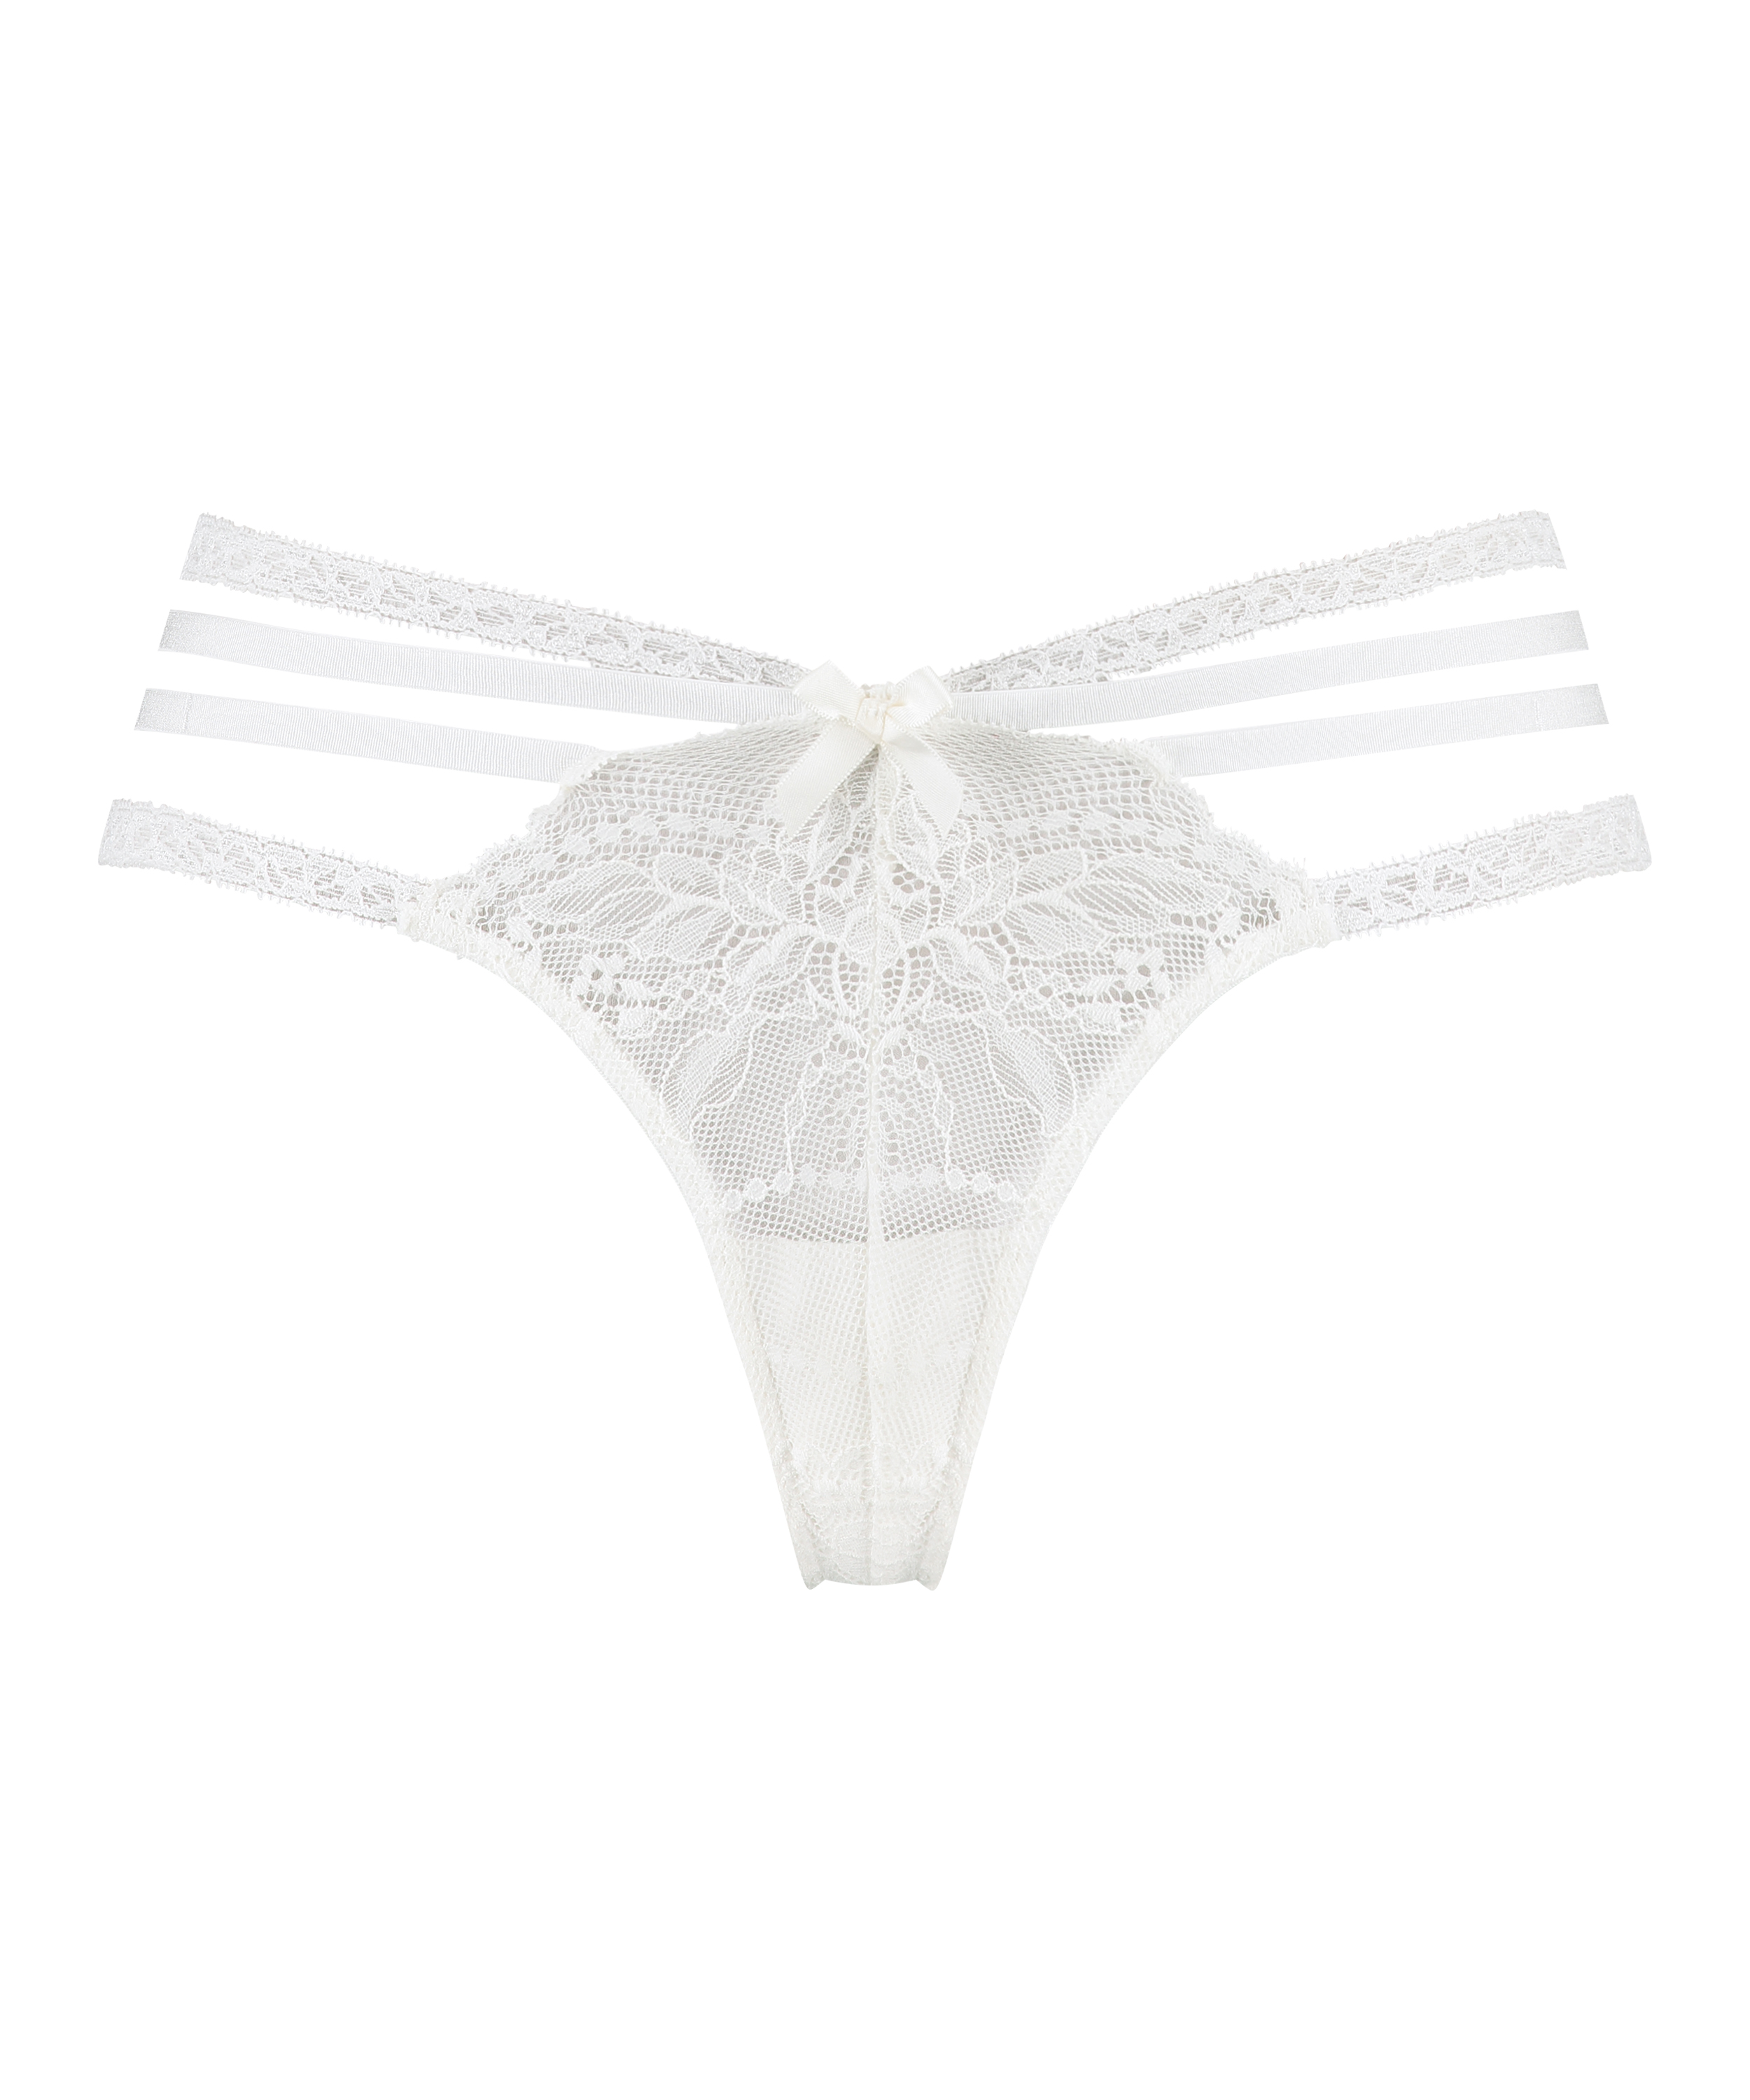 Lorraine Extra Low-rise Thong, White, main